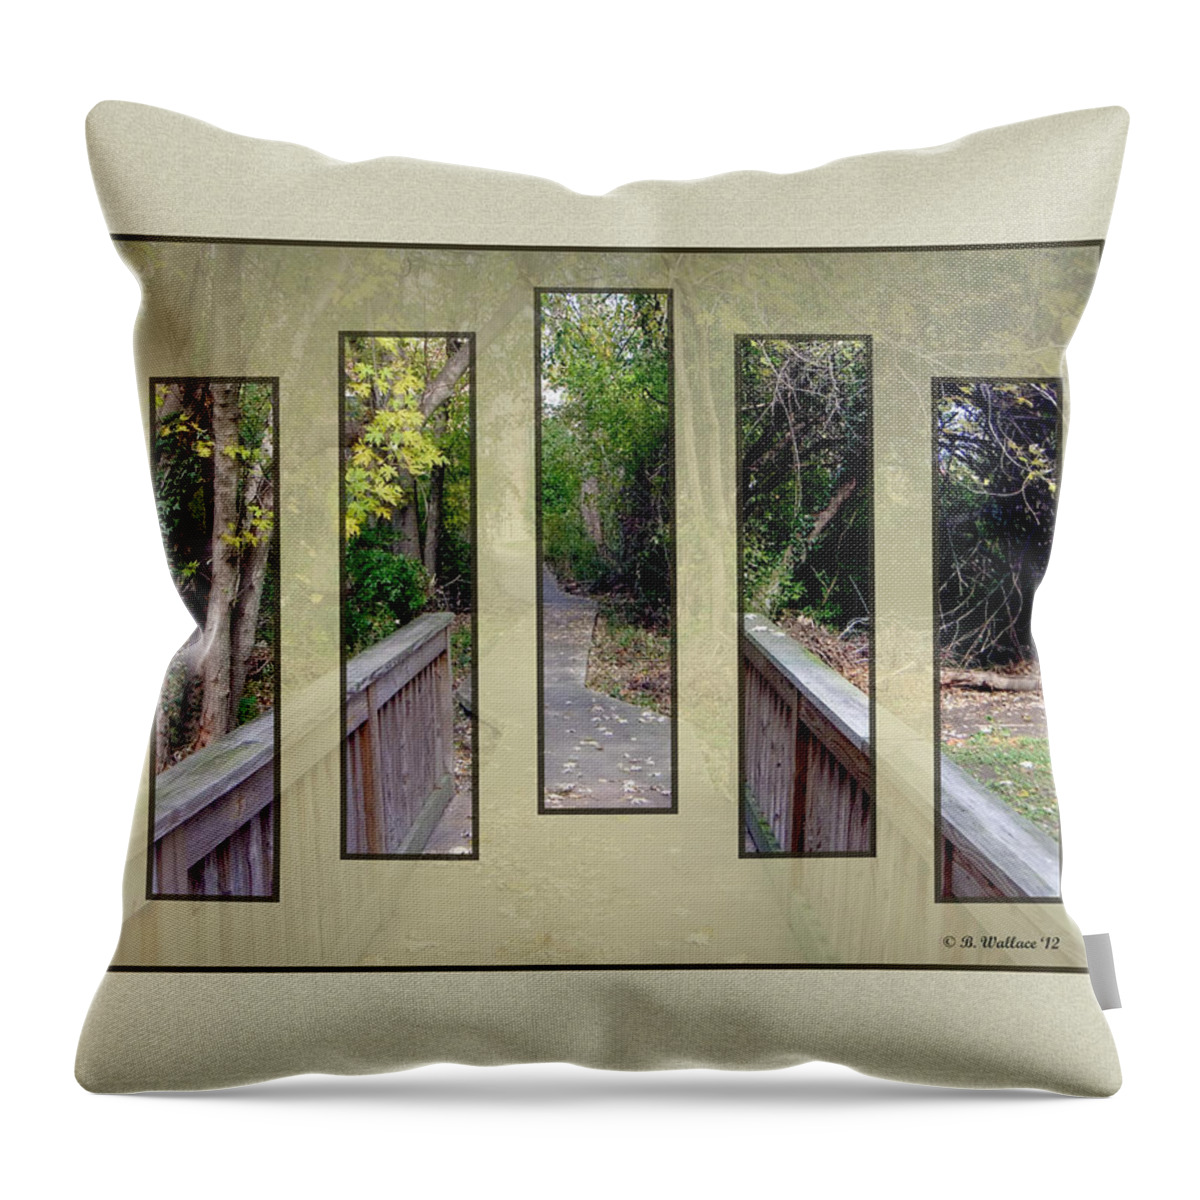 2d Throw Pillow featuring the photograph Wooden Walk Bridge by Brian Wallace